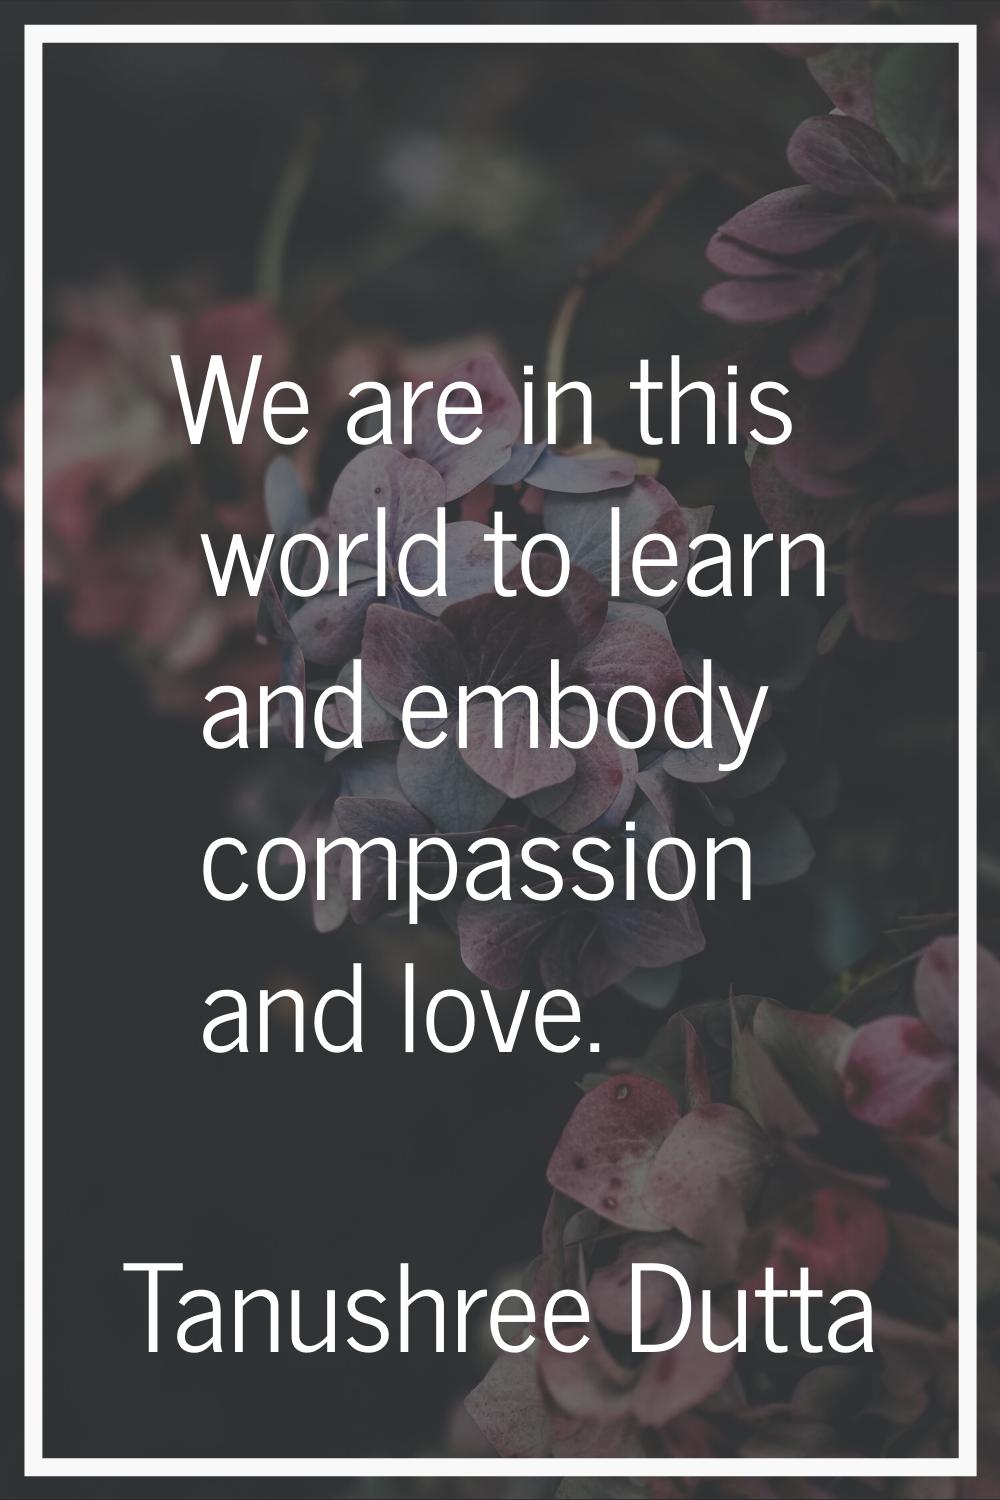 We are in this world to learn and embody compassion and love.